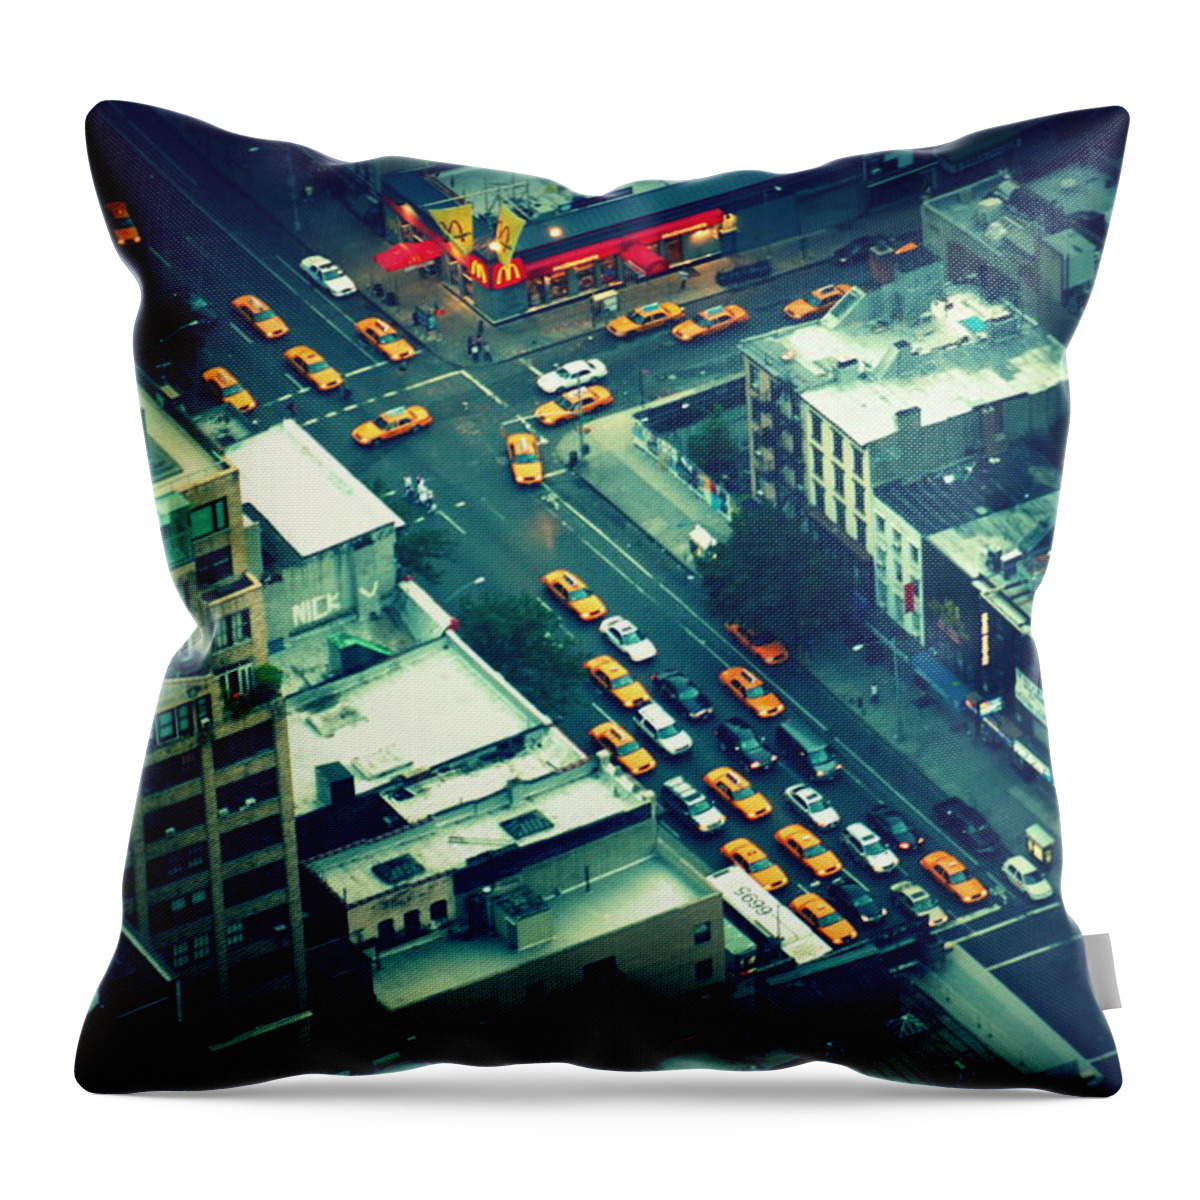 Above Throw Pillow featuring the photograph In The City That Never by Beatriz Festa